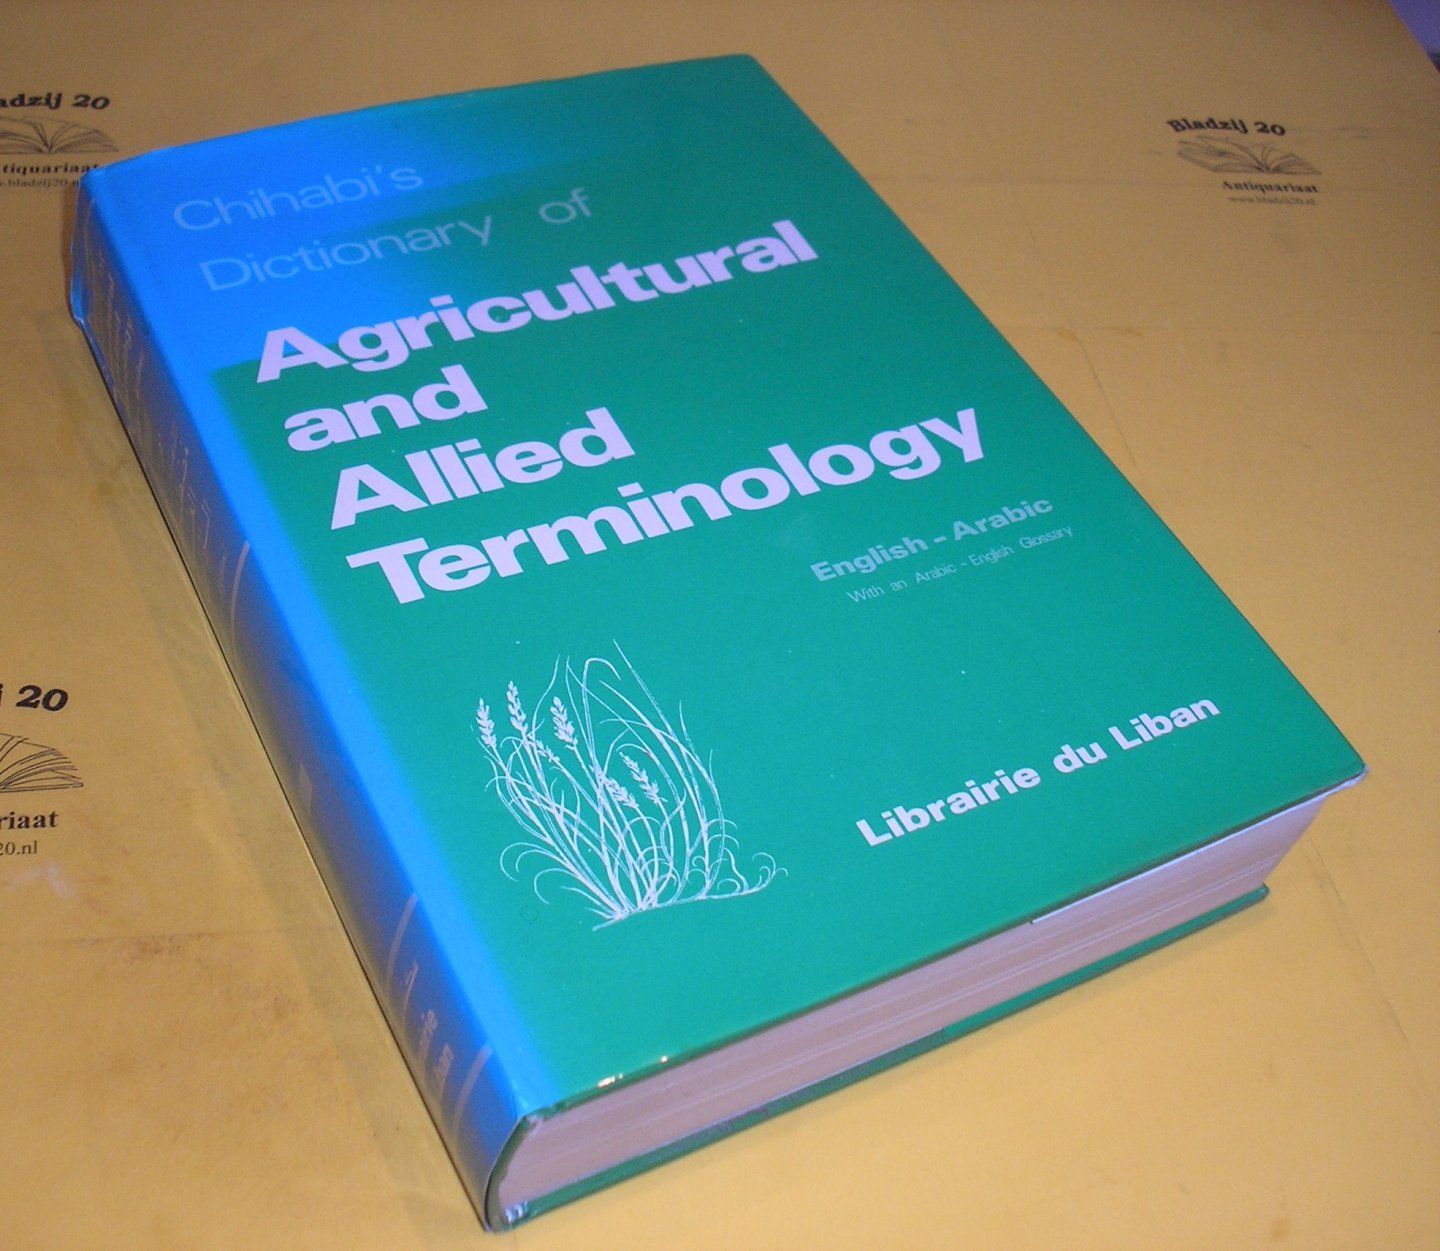 Al-Khatib,Ahmad Sh. - Chihabi`s dictionary of agricultural and allied terminology. English-Arabic. With an Arabic-English glossary.